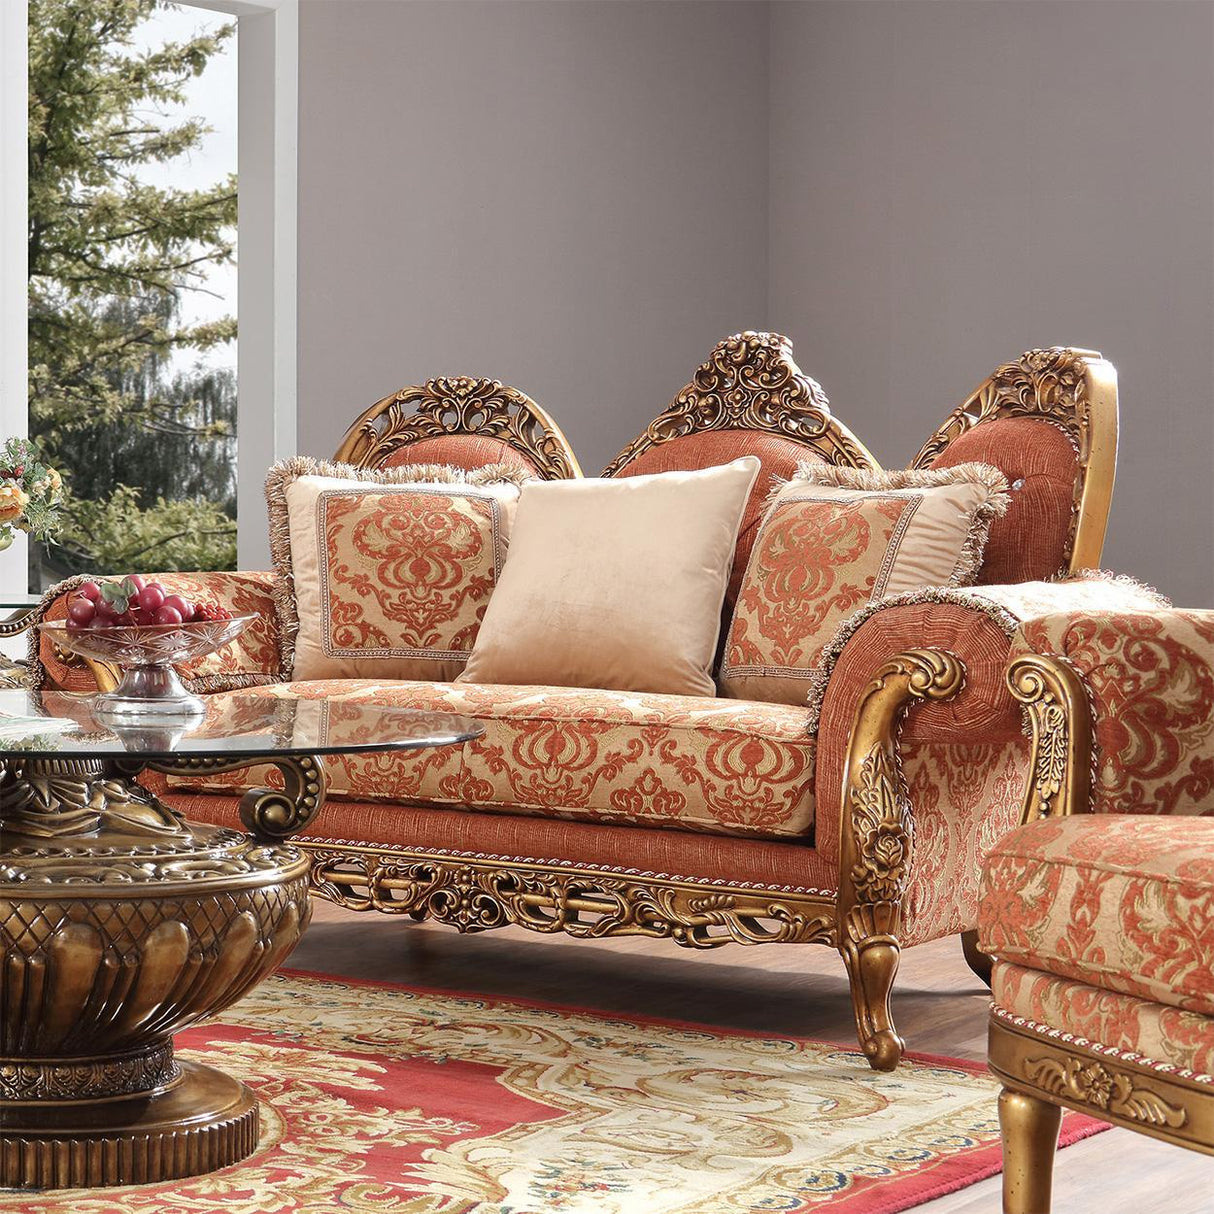 HD-106 Traditional Sofa and Loveseat by Homey Design Furniture Homey Design Furniture